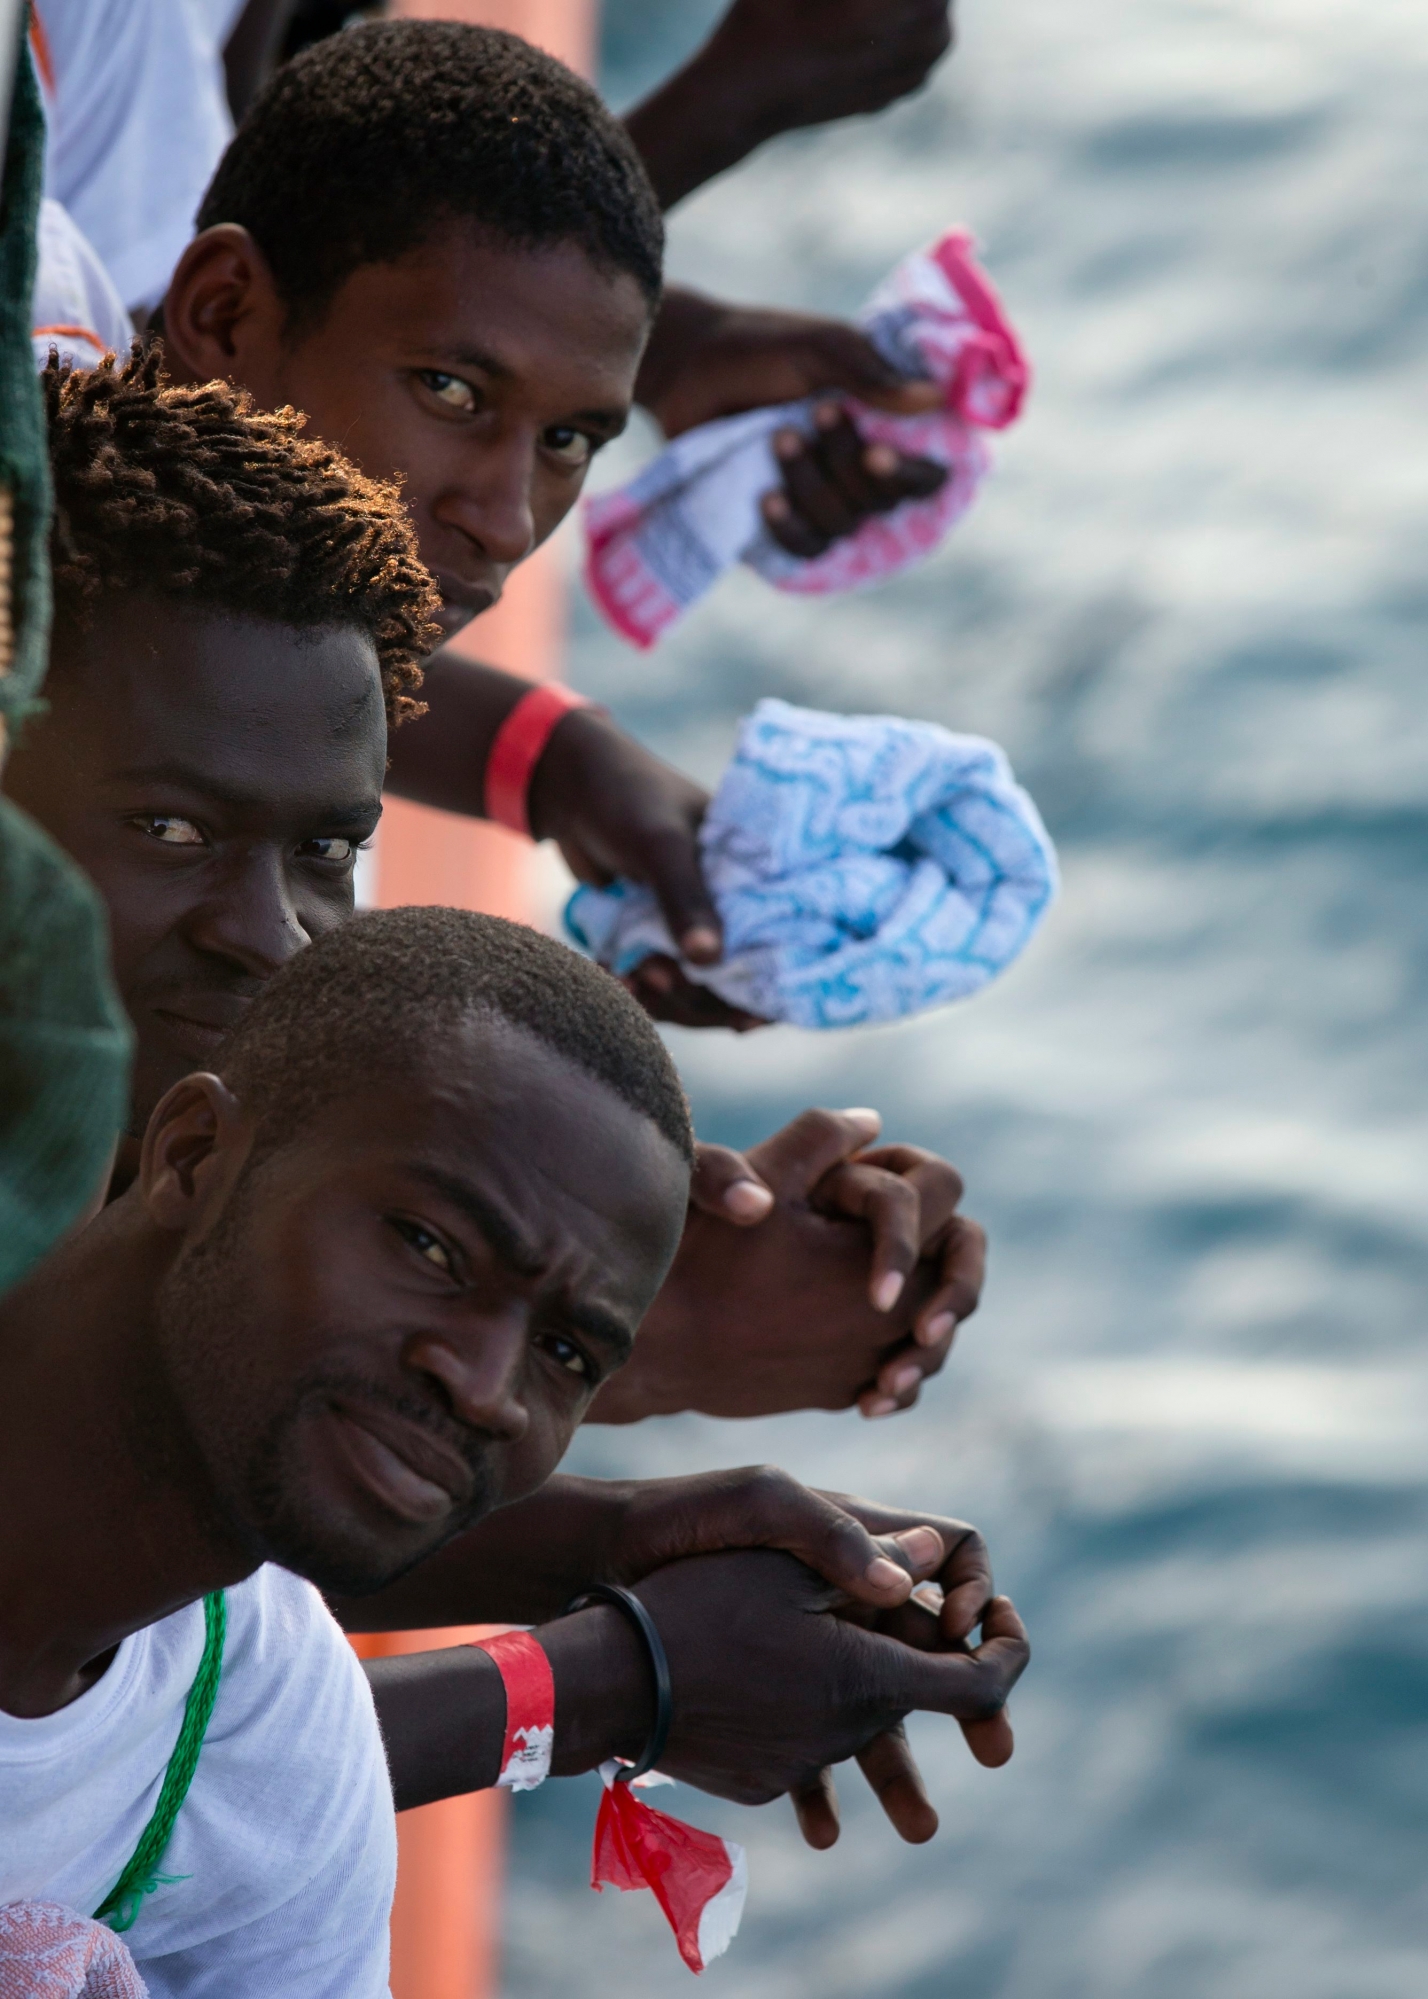 African migrants who were rescued from the Mediterranean Sea north of Libyan coast, look from the deck as the Aquarius vessel of SOS Mediterranee and MSF (Doctors Without Borders) NGOs, approaches the port of Pozzallo on Sicily, Italy, Friday, Sept. 1, 2017. (AP Photo/Darko Bandic) EU LIBYA MIGRANTS